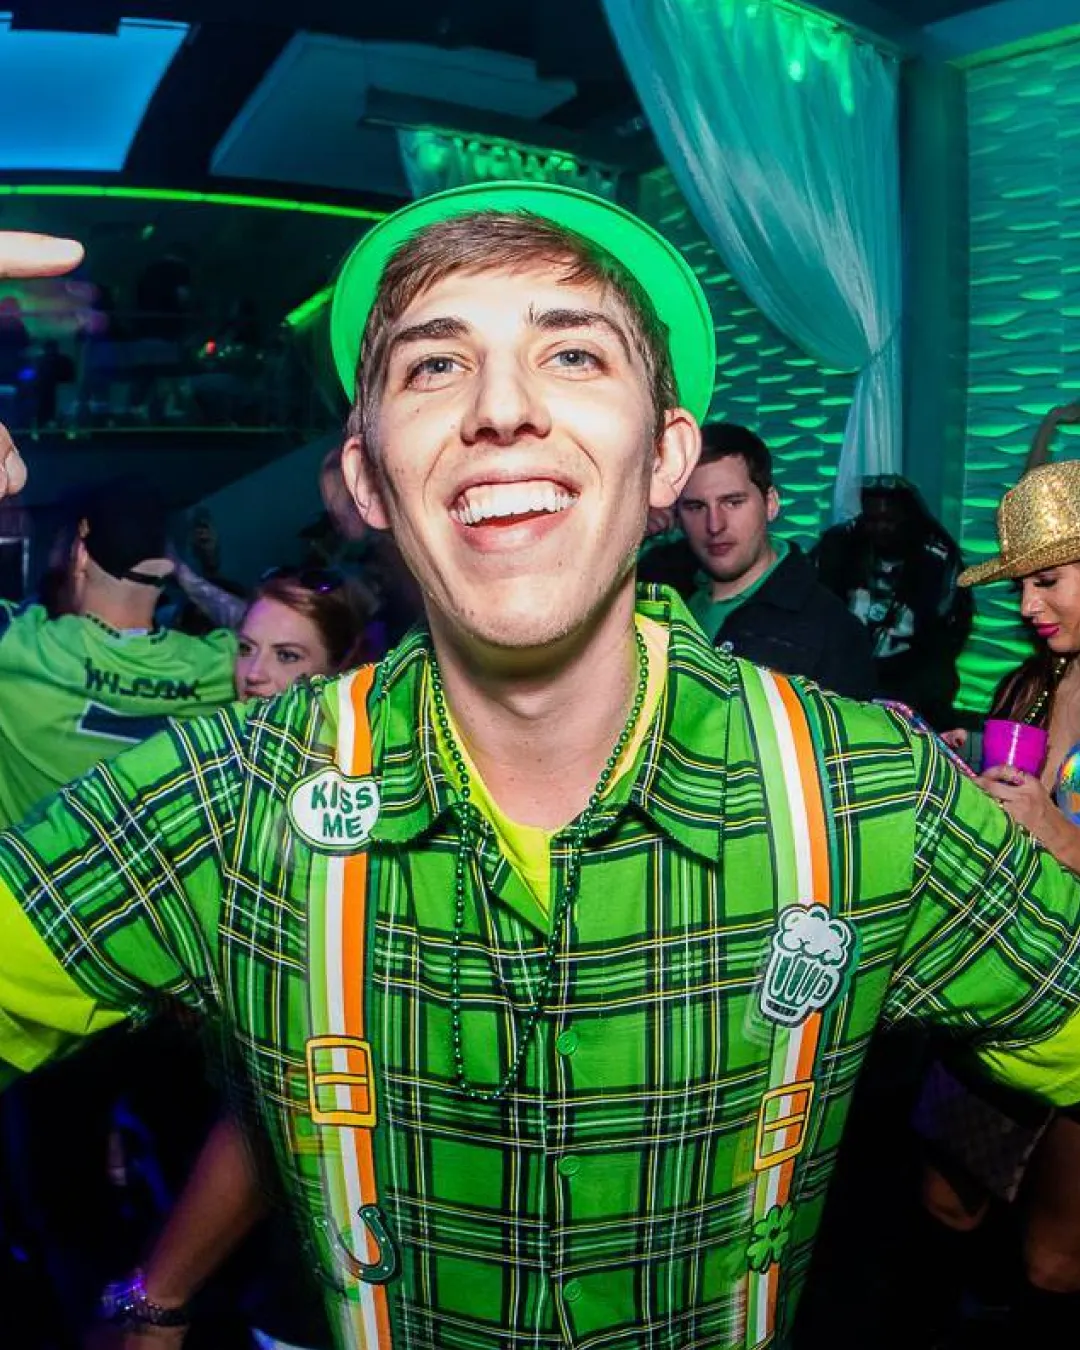 Energetic young man in vibrant green attire, enjoying the bustling st patricks day energy at the bar crawl in Raleigh
